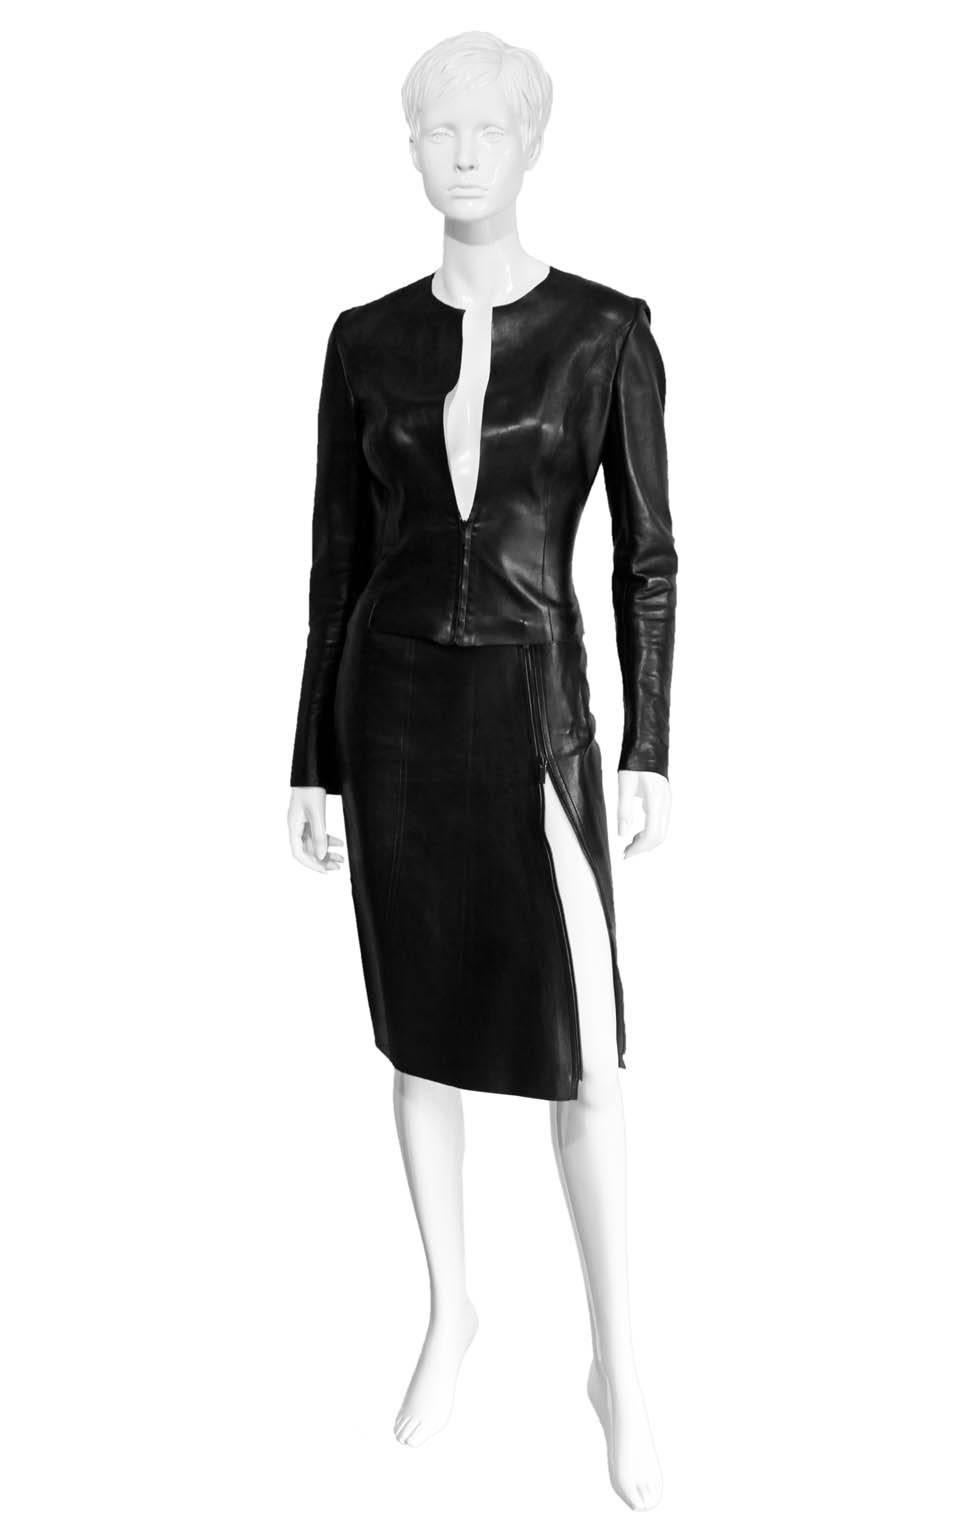 Gorgeous Tom Ford For Gucci Fall Winter 1997 Black Leather Moto Jacket & Skirt!

The gorgeous moto jacket & skirt set is an italian size 40/38 & the jacket fits a US size 2-4 beautifully while the matching skirt best fits a US size 2. This set is